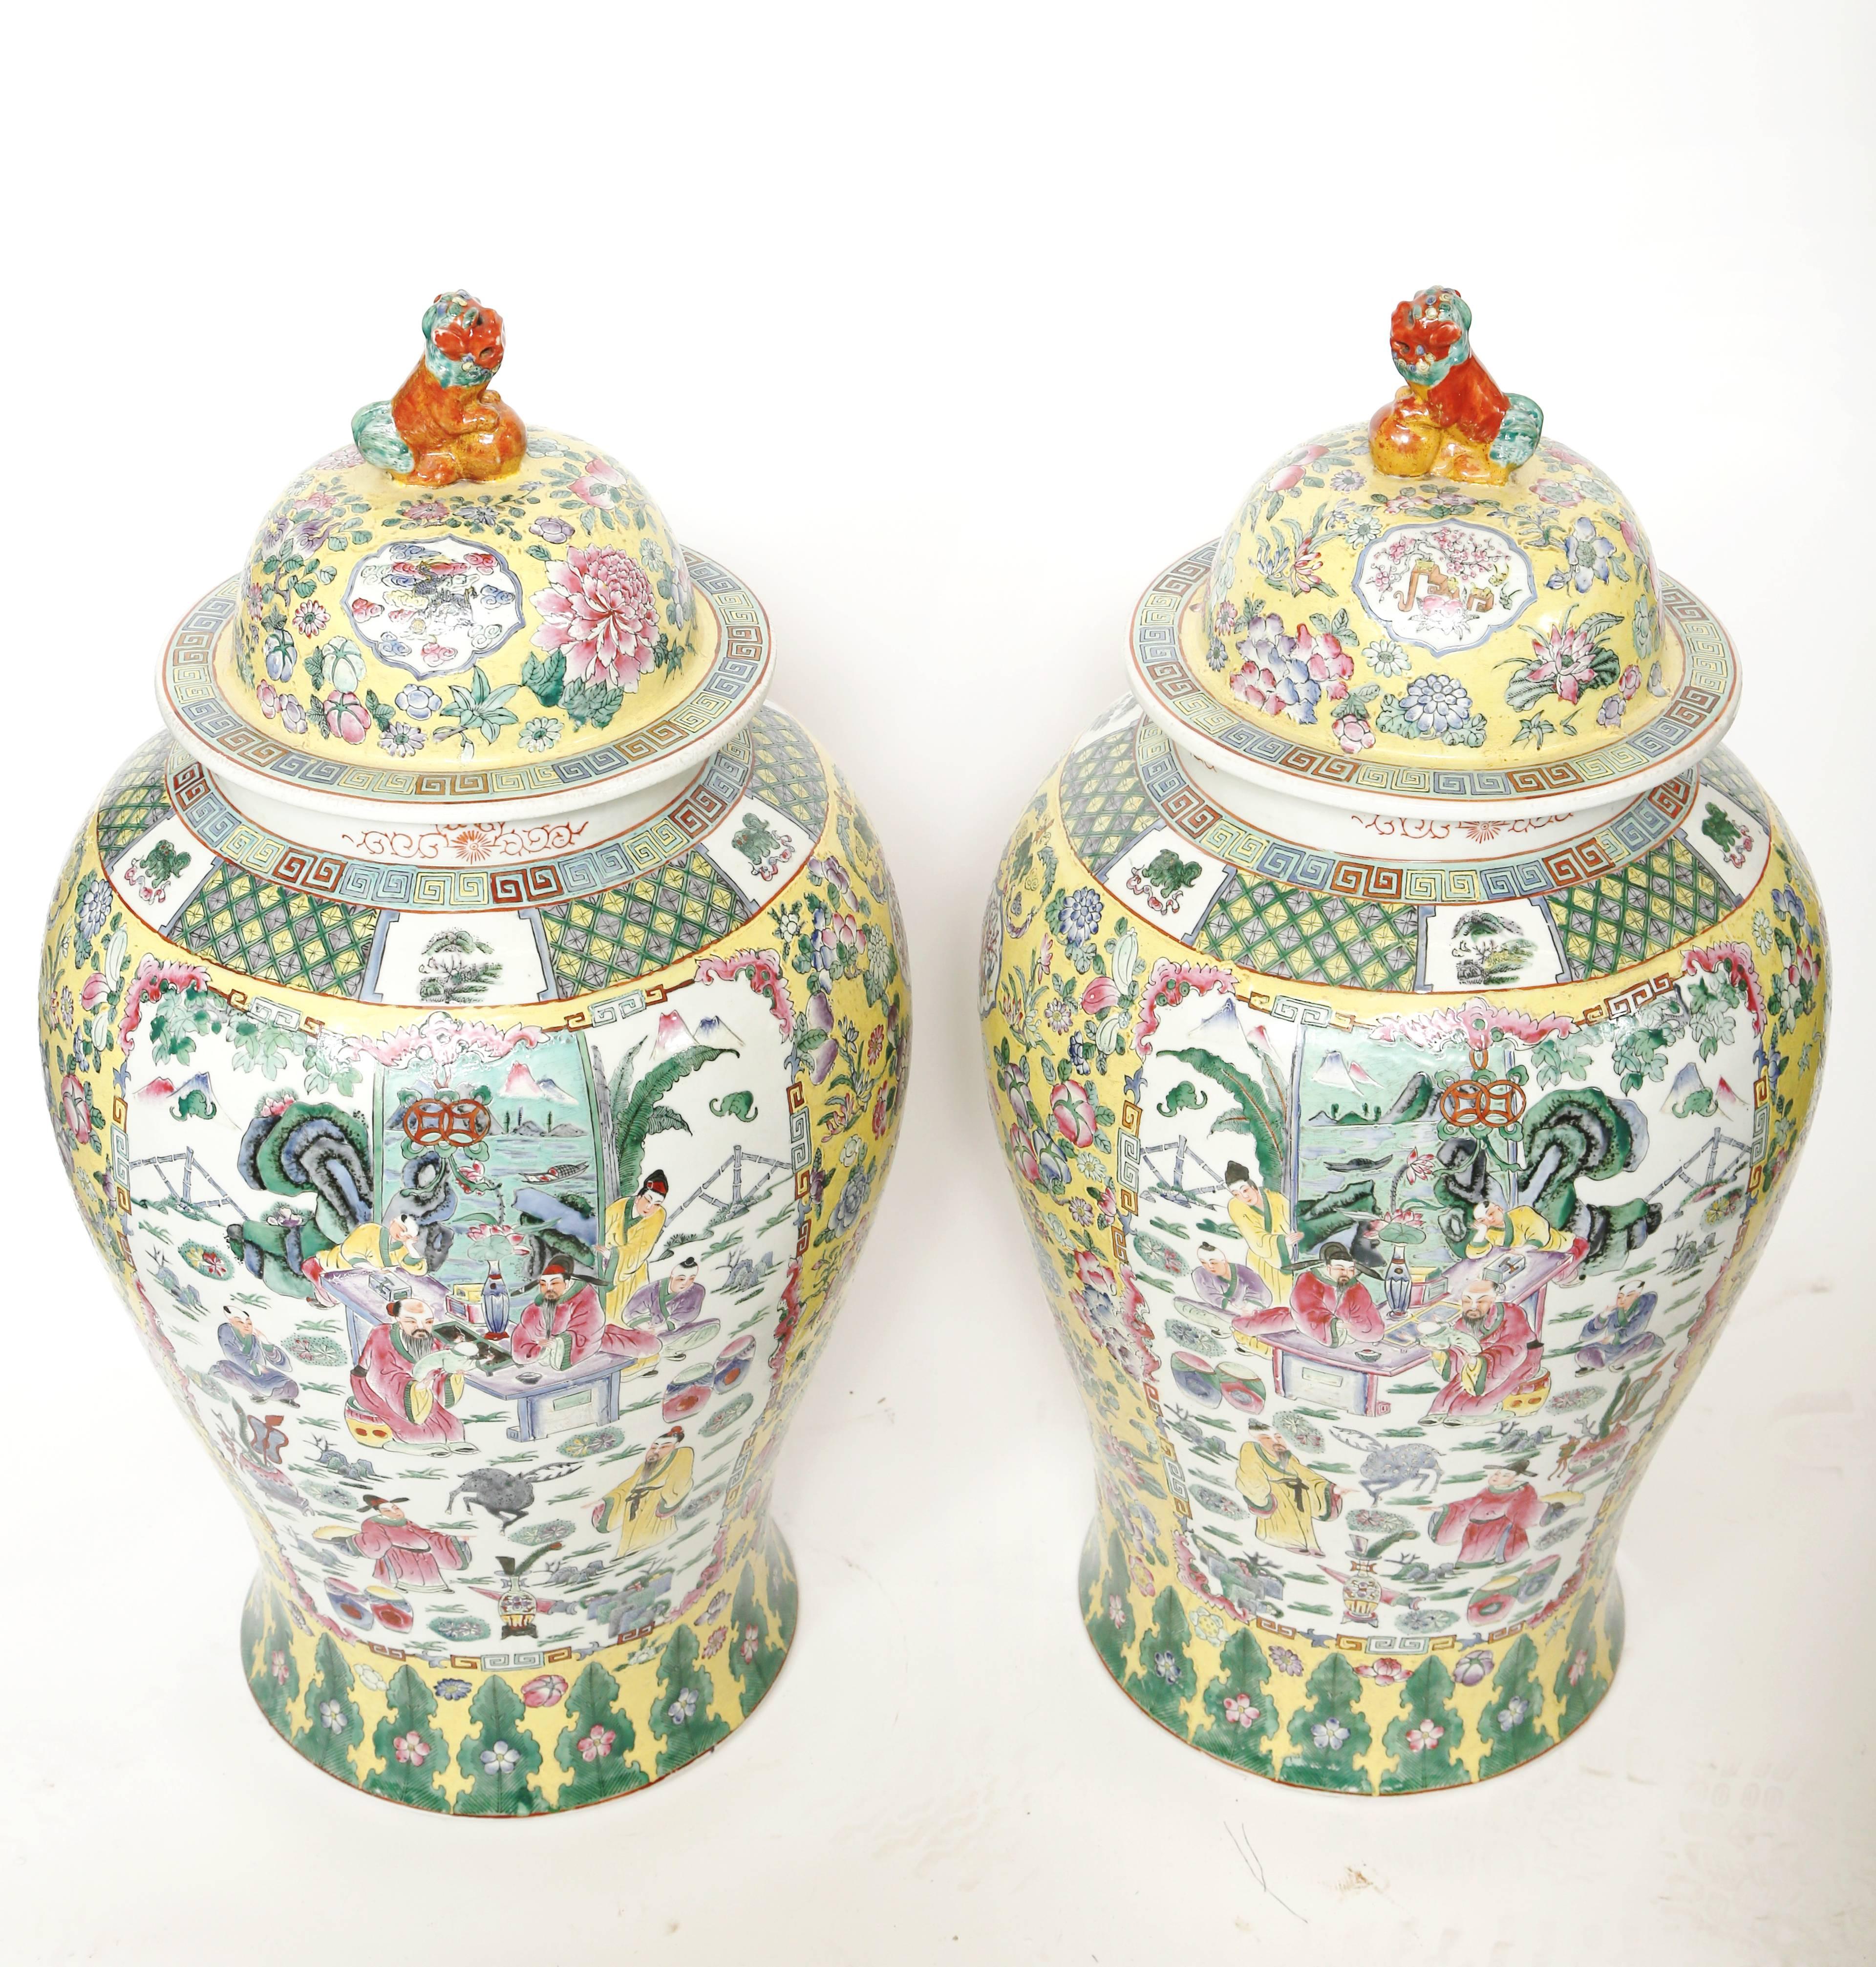 Pair or very large Chinese porcelain temple jars. The jars are hand decorated in lovely pastel colors with a pair of mirror image scenes on the front and back. The sides are decorated with floral images. The lids have an iron red foo lion on top.